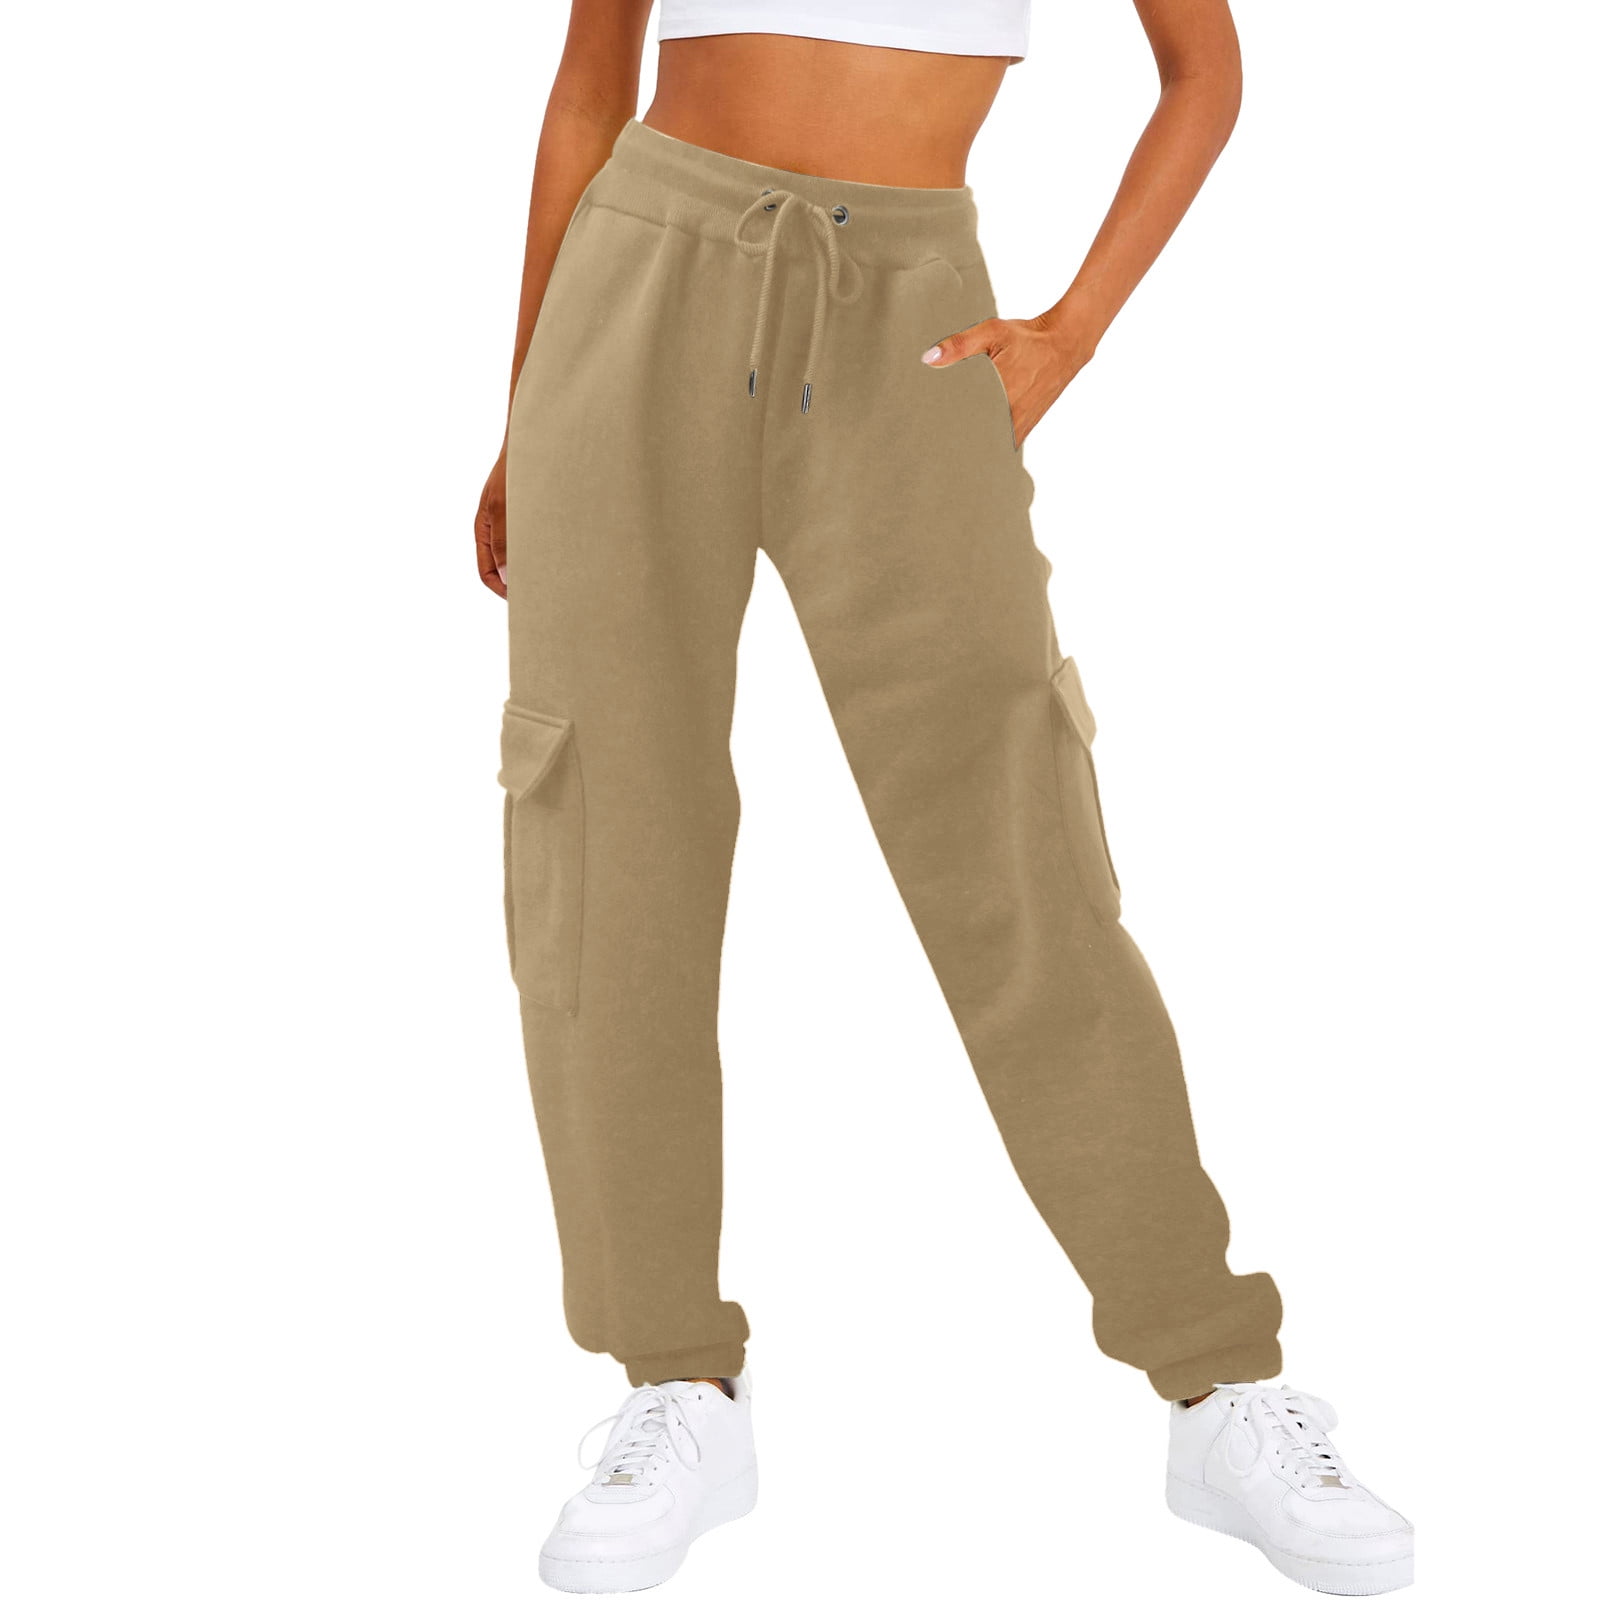 Knosfe Petite Sweatpants with Pockets Fleece Lined High Waist Joggers  Athletic Cargo Pants Straight Leg Lounge Cargo Sweatpants Long Baggy Casual